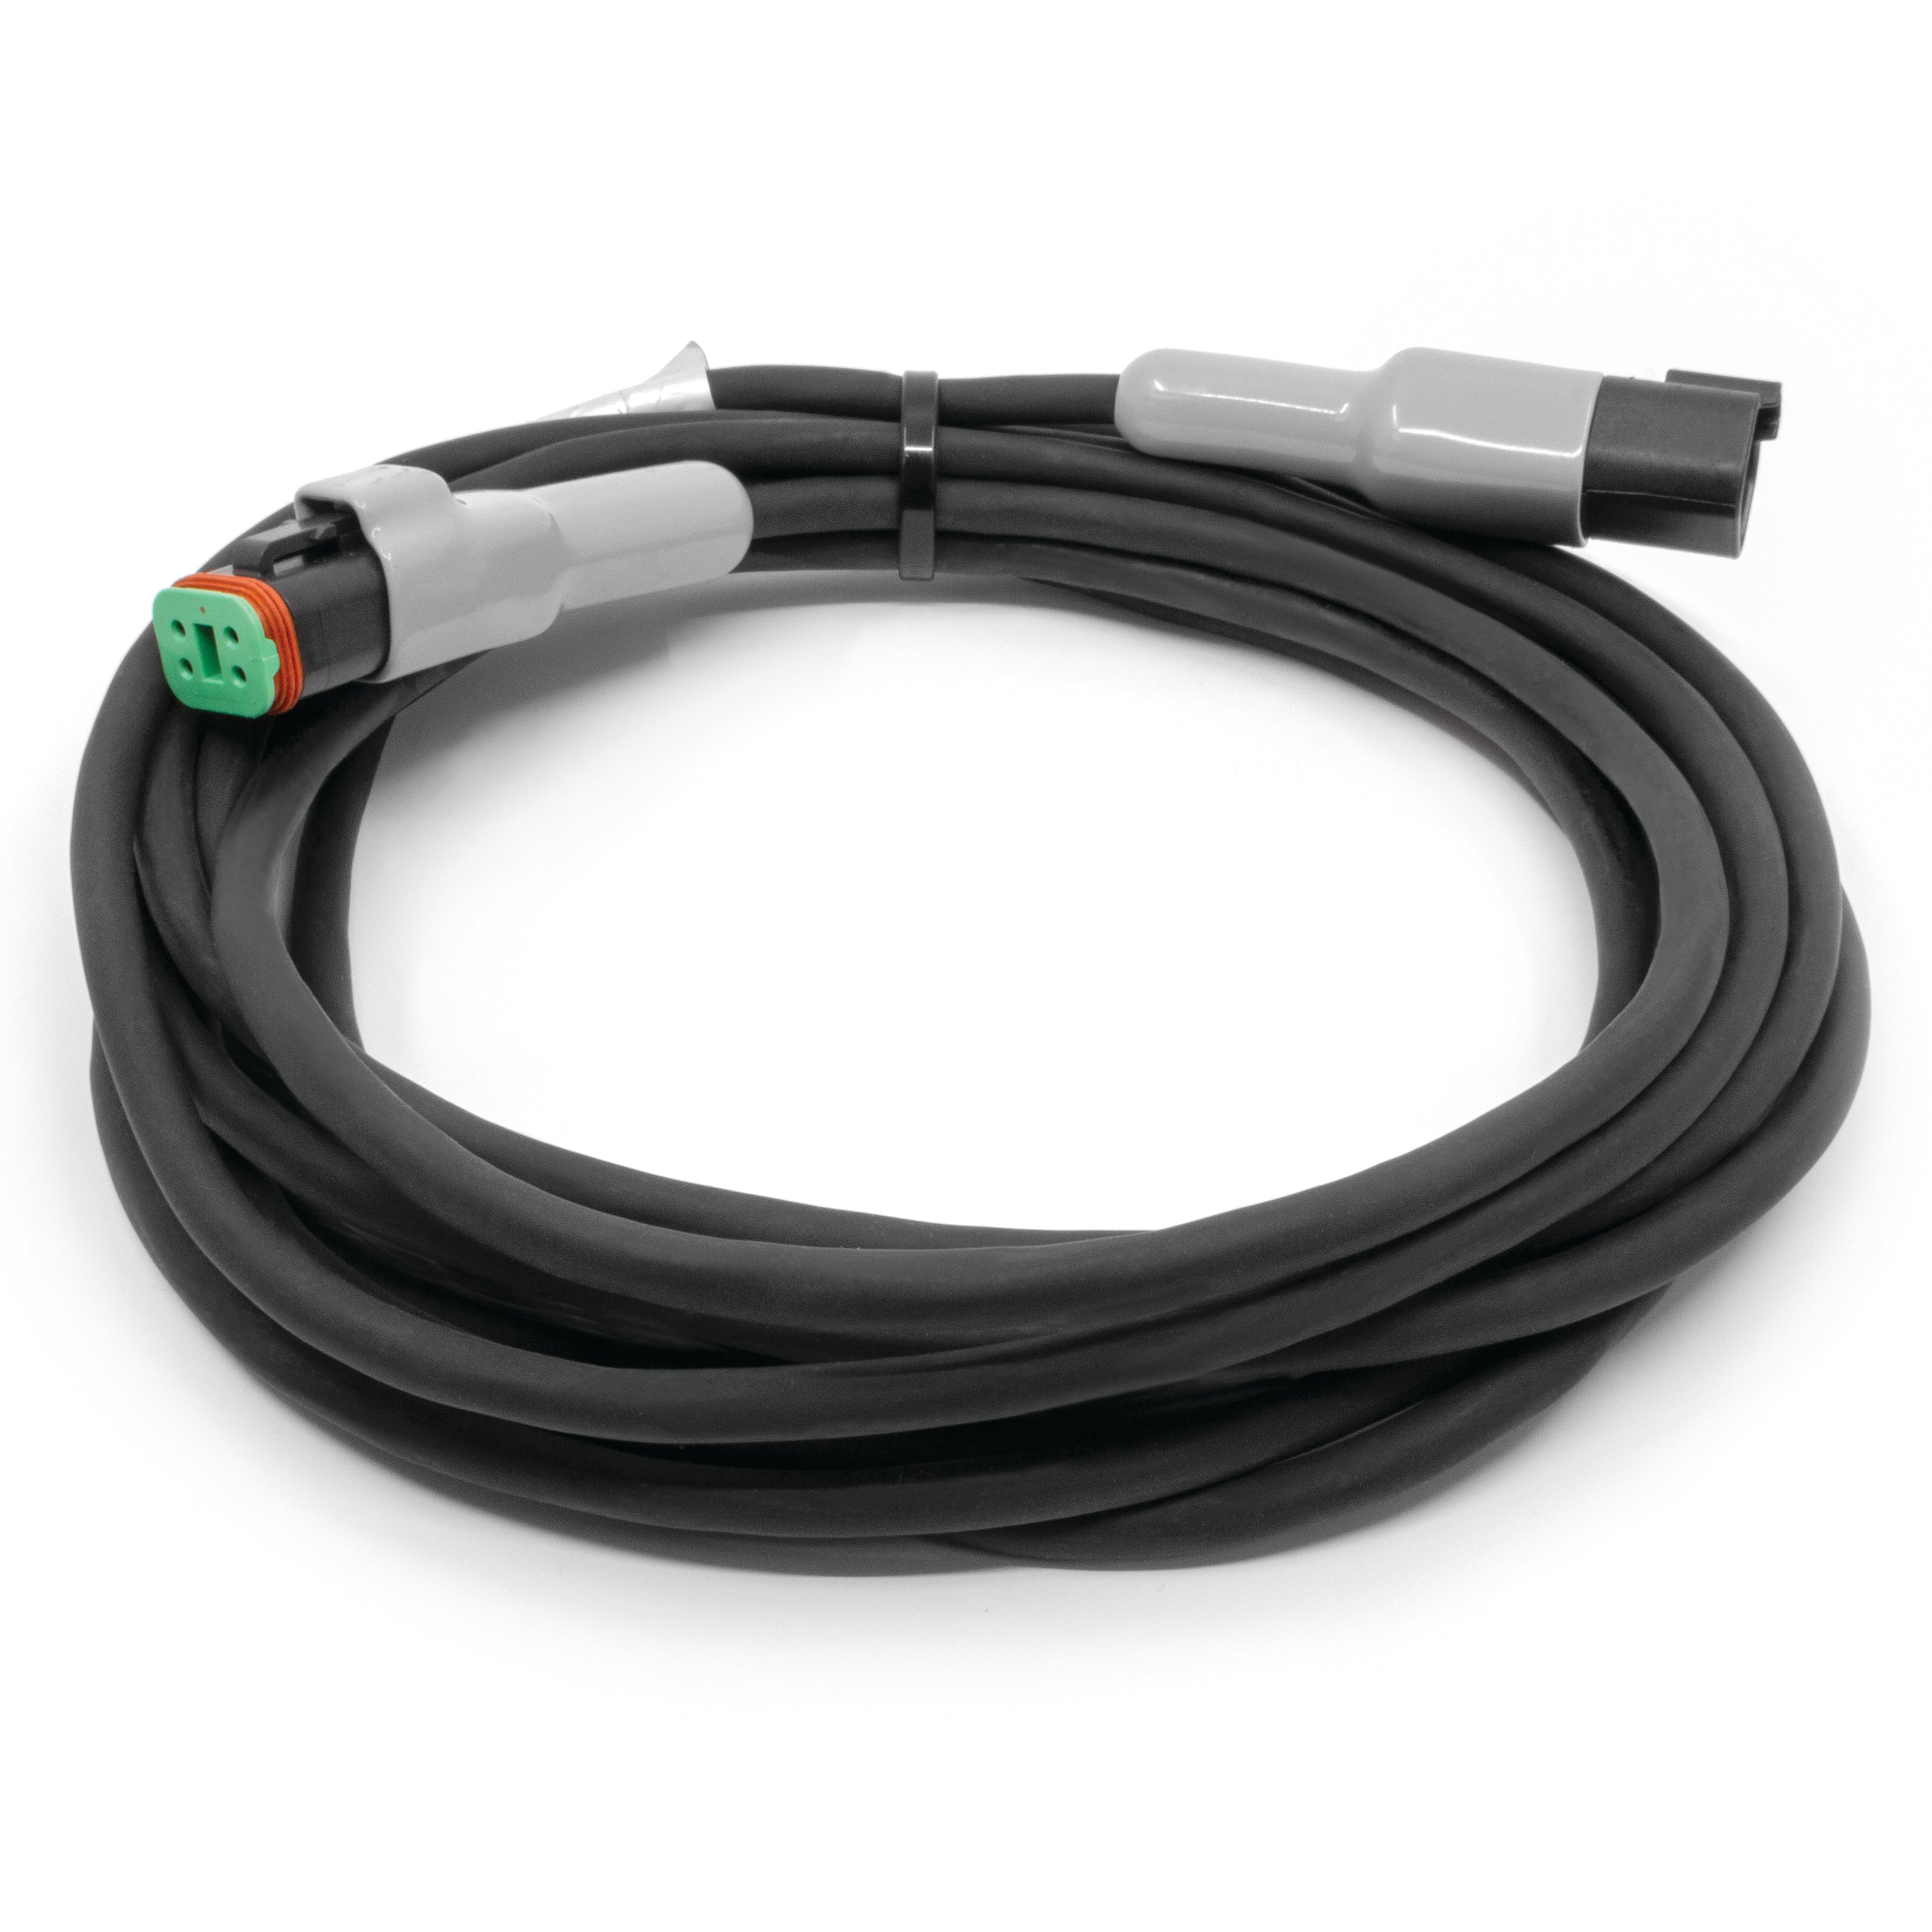 5 metre extension cable for Backsense radar detection systems